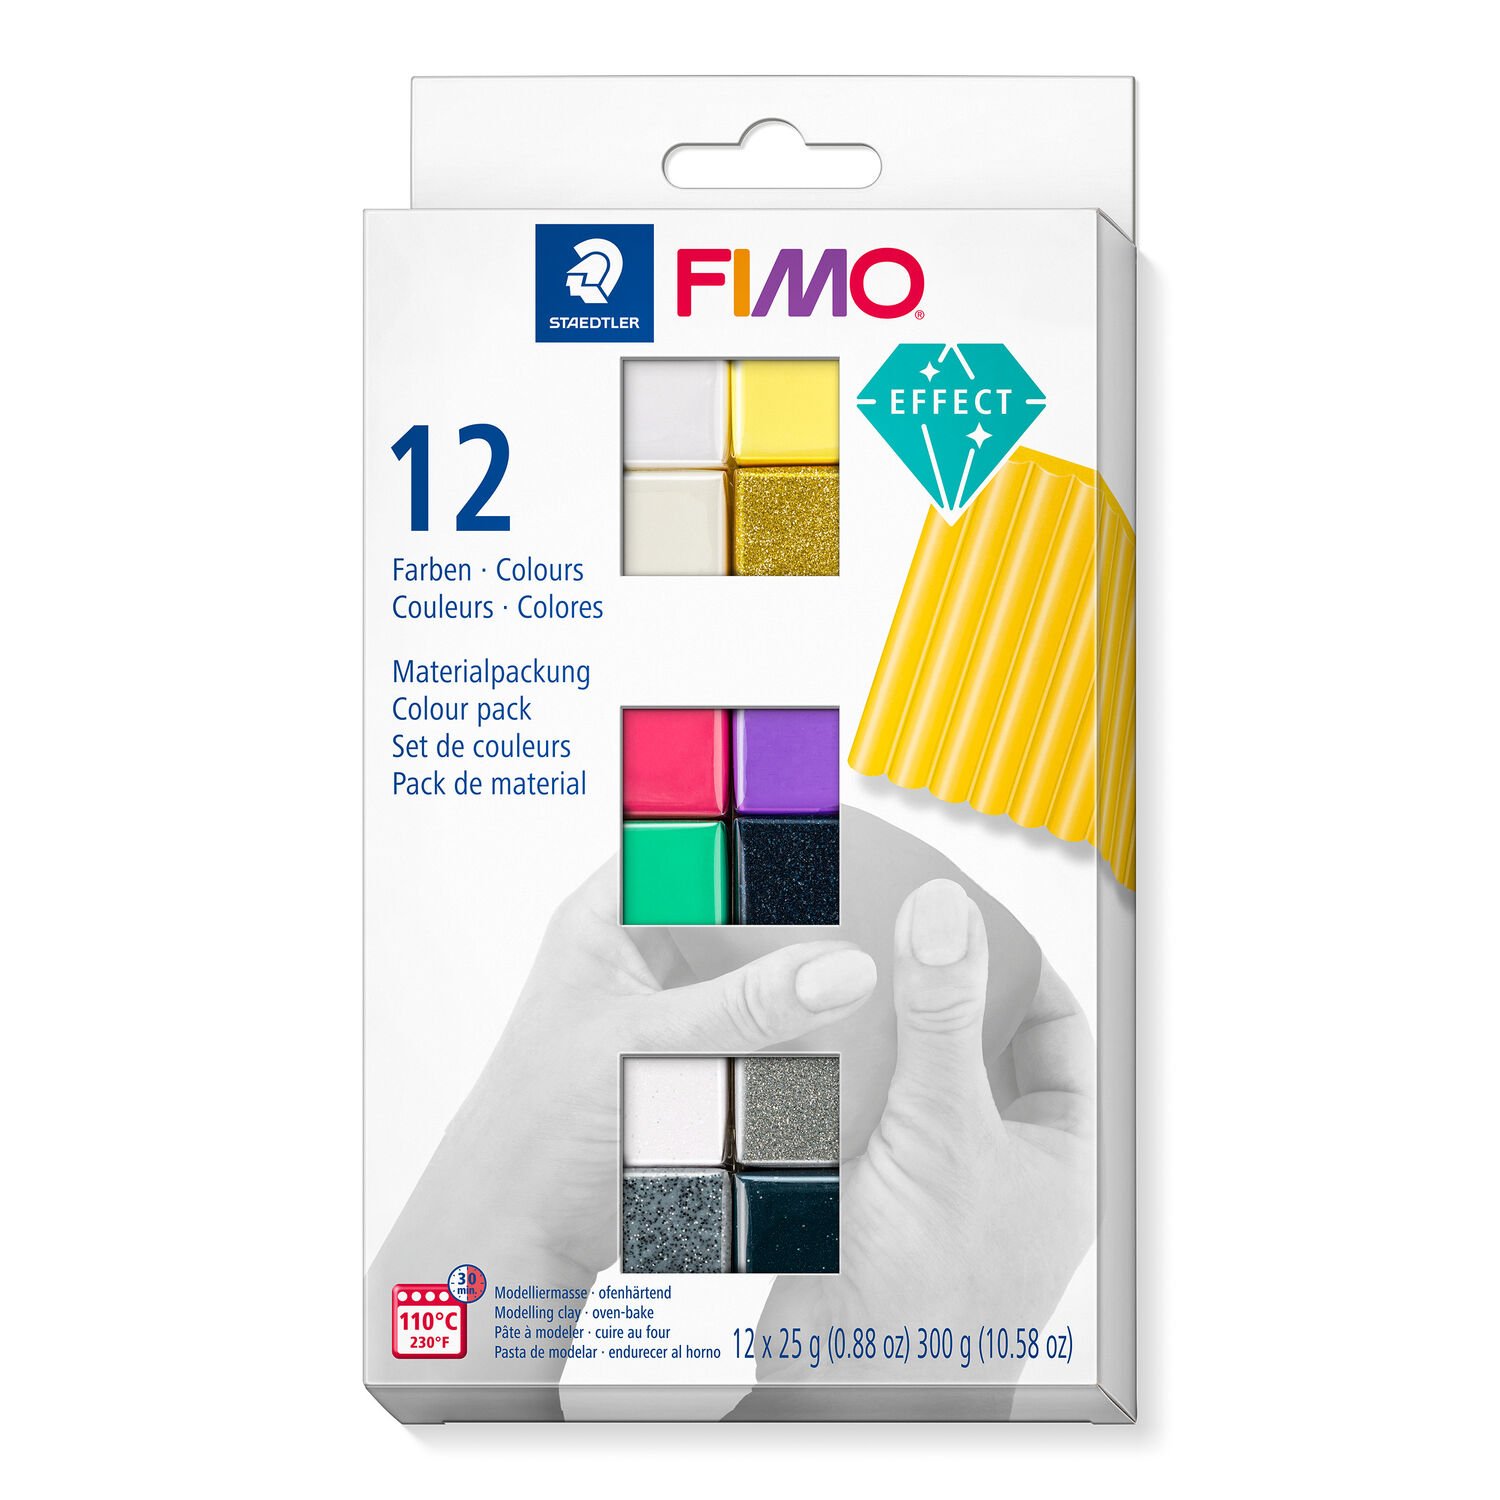 Colour Pack FIMO effect in cardboard box with 12 half blocks (assorted colours), instructions